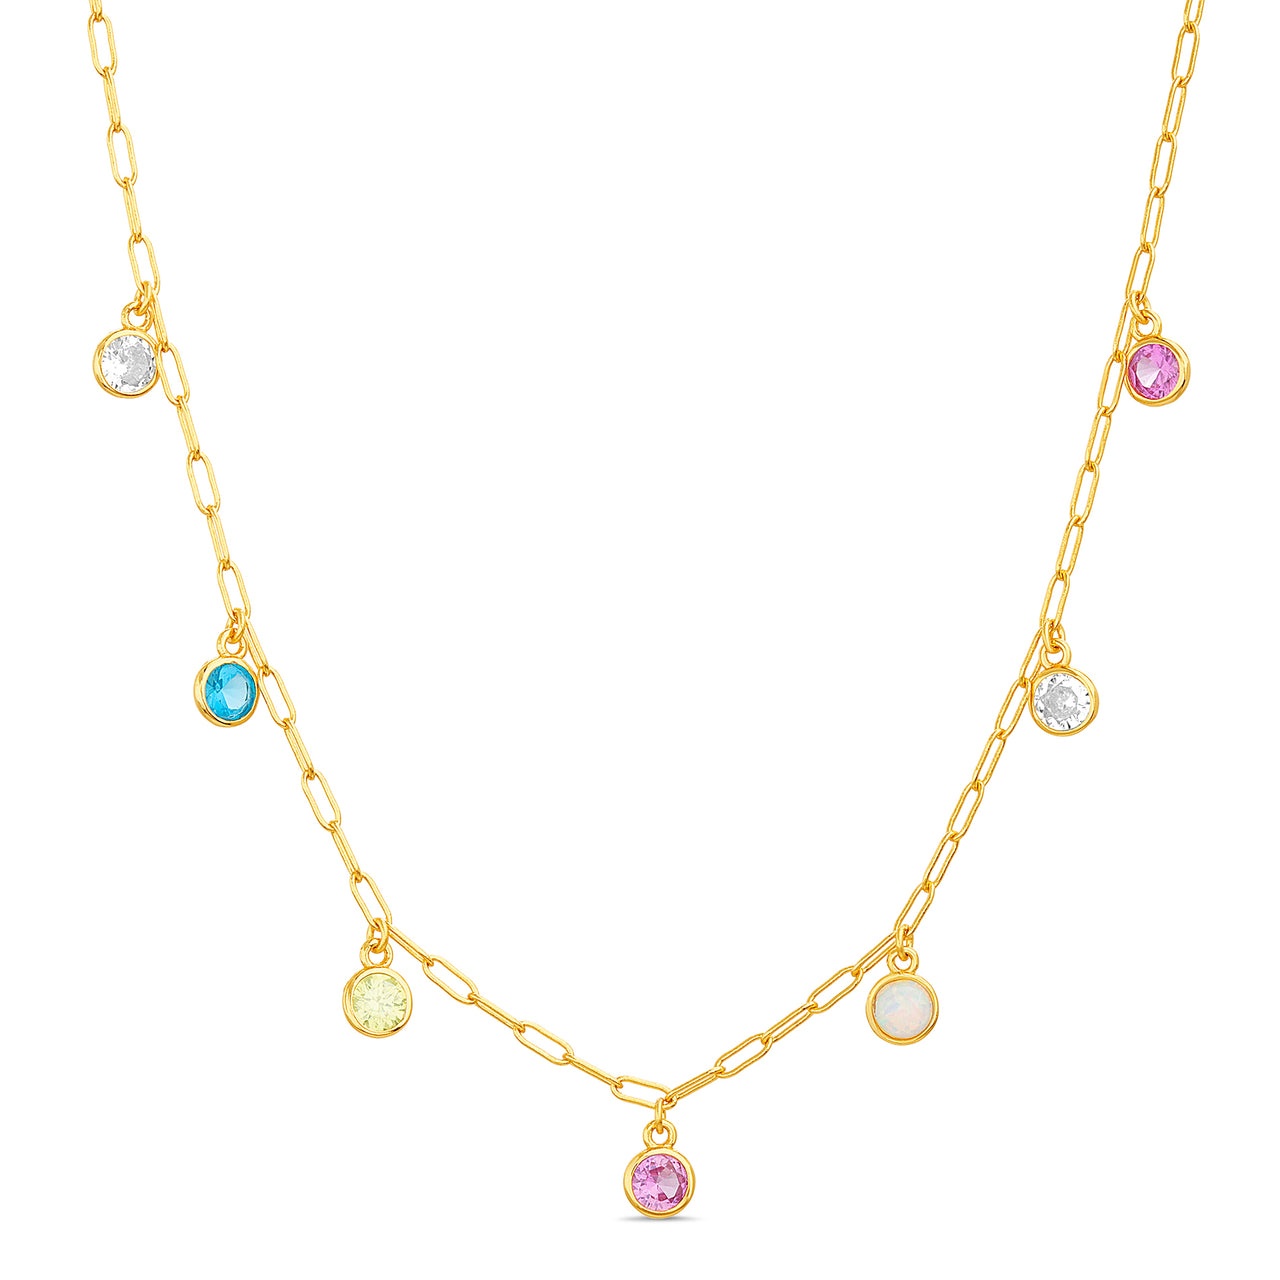 Lesa Michele Pastel Colorful Cubic Zirconia Dangles Necklace in Yellow Gold Plated Sterling Silver